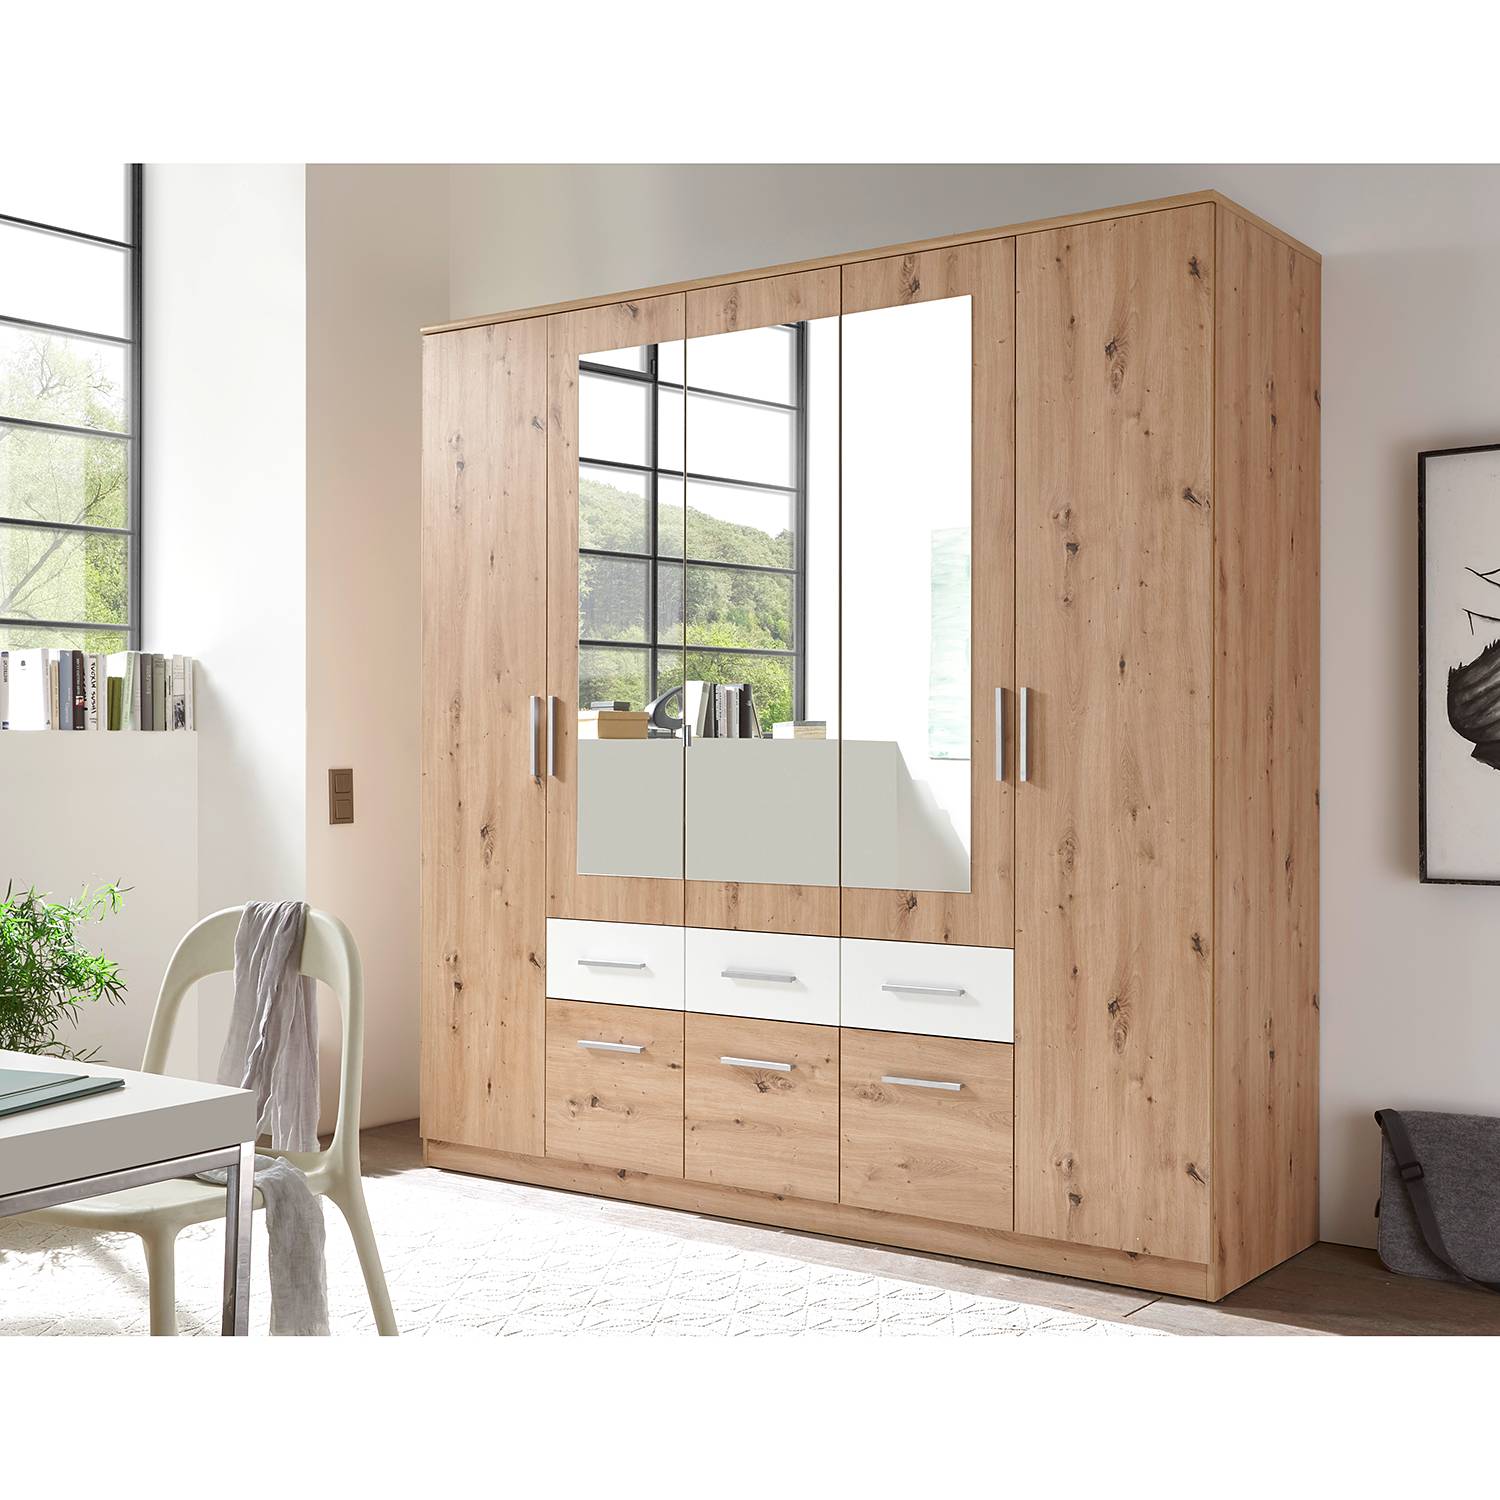 Image of Armoire Gainford 000000001000212364